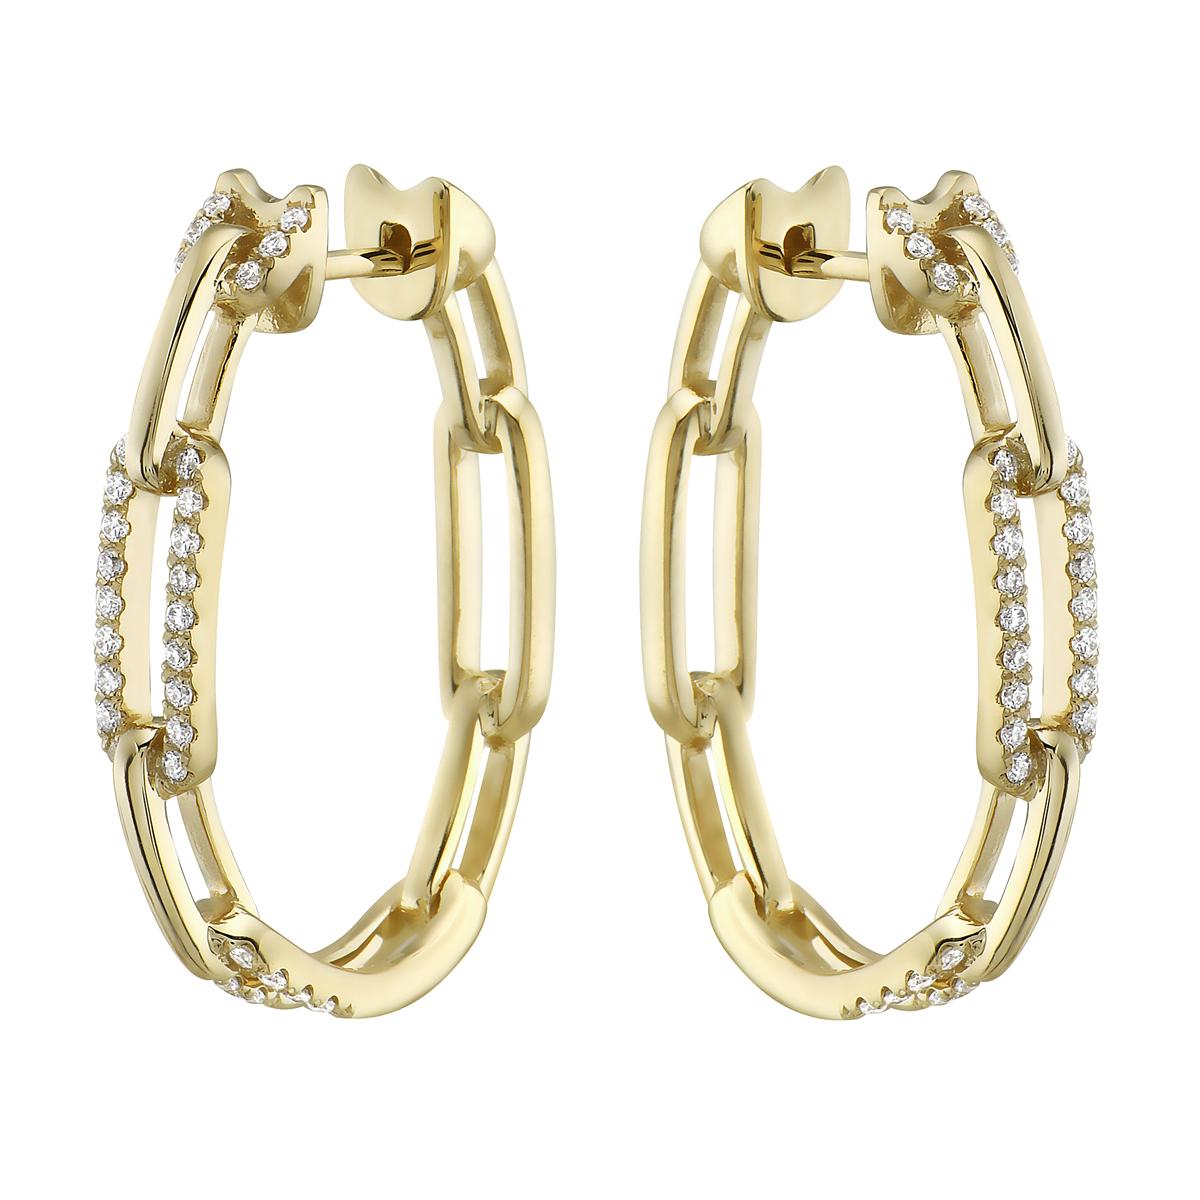 With these exquisite yellow gold hoop earrings, style and glamour are in the spotlight. These hoops are set in 14-carat gold, made out of 5.9 grams of gold. The color of the diamonds is GH. The clarity is SI1-OSI2. These earrings are made out of 64